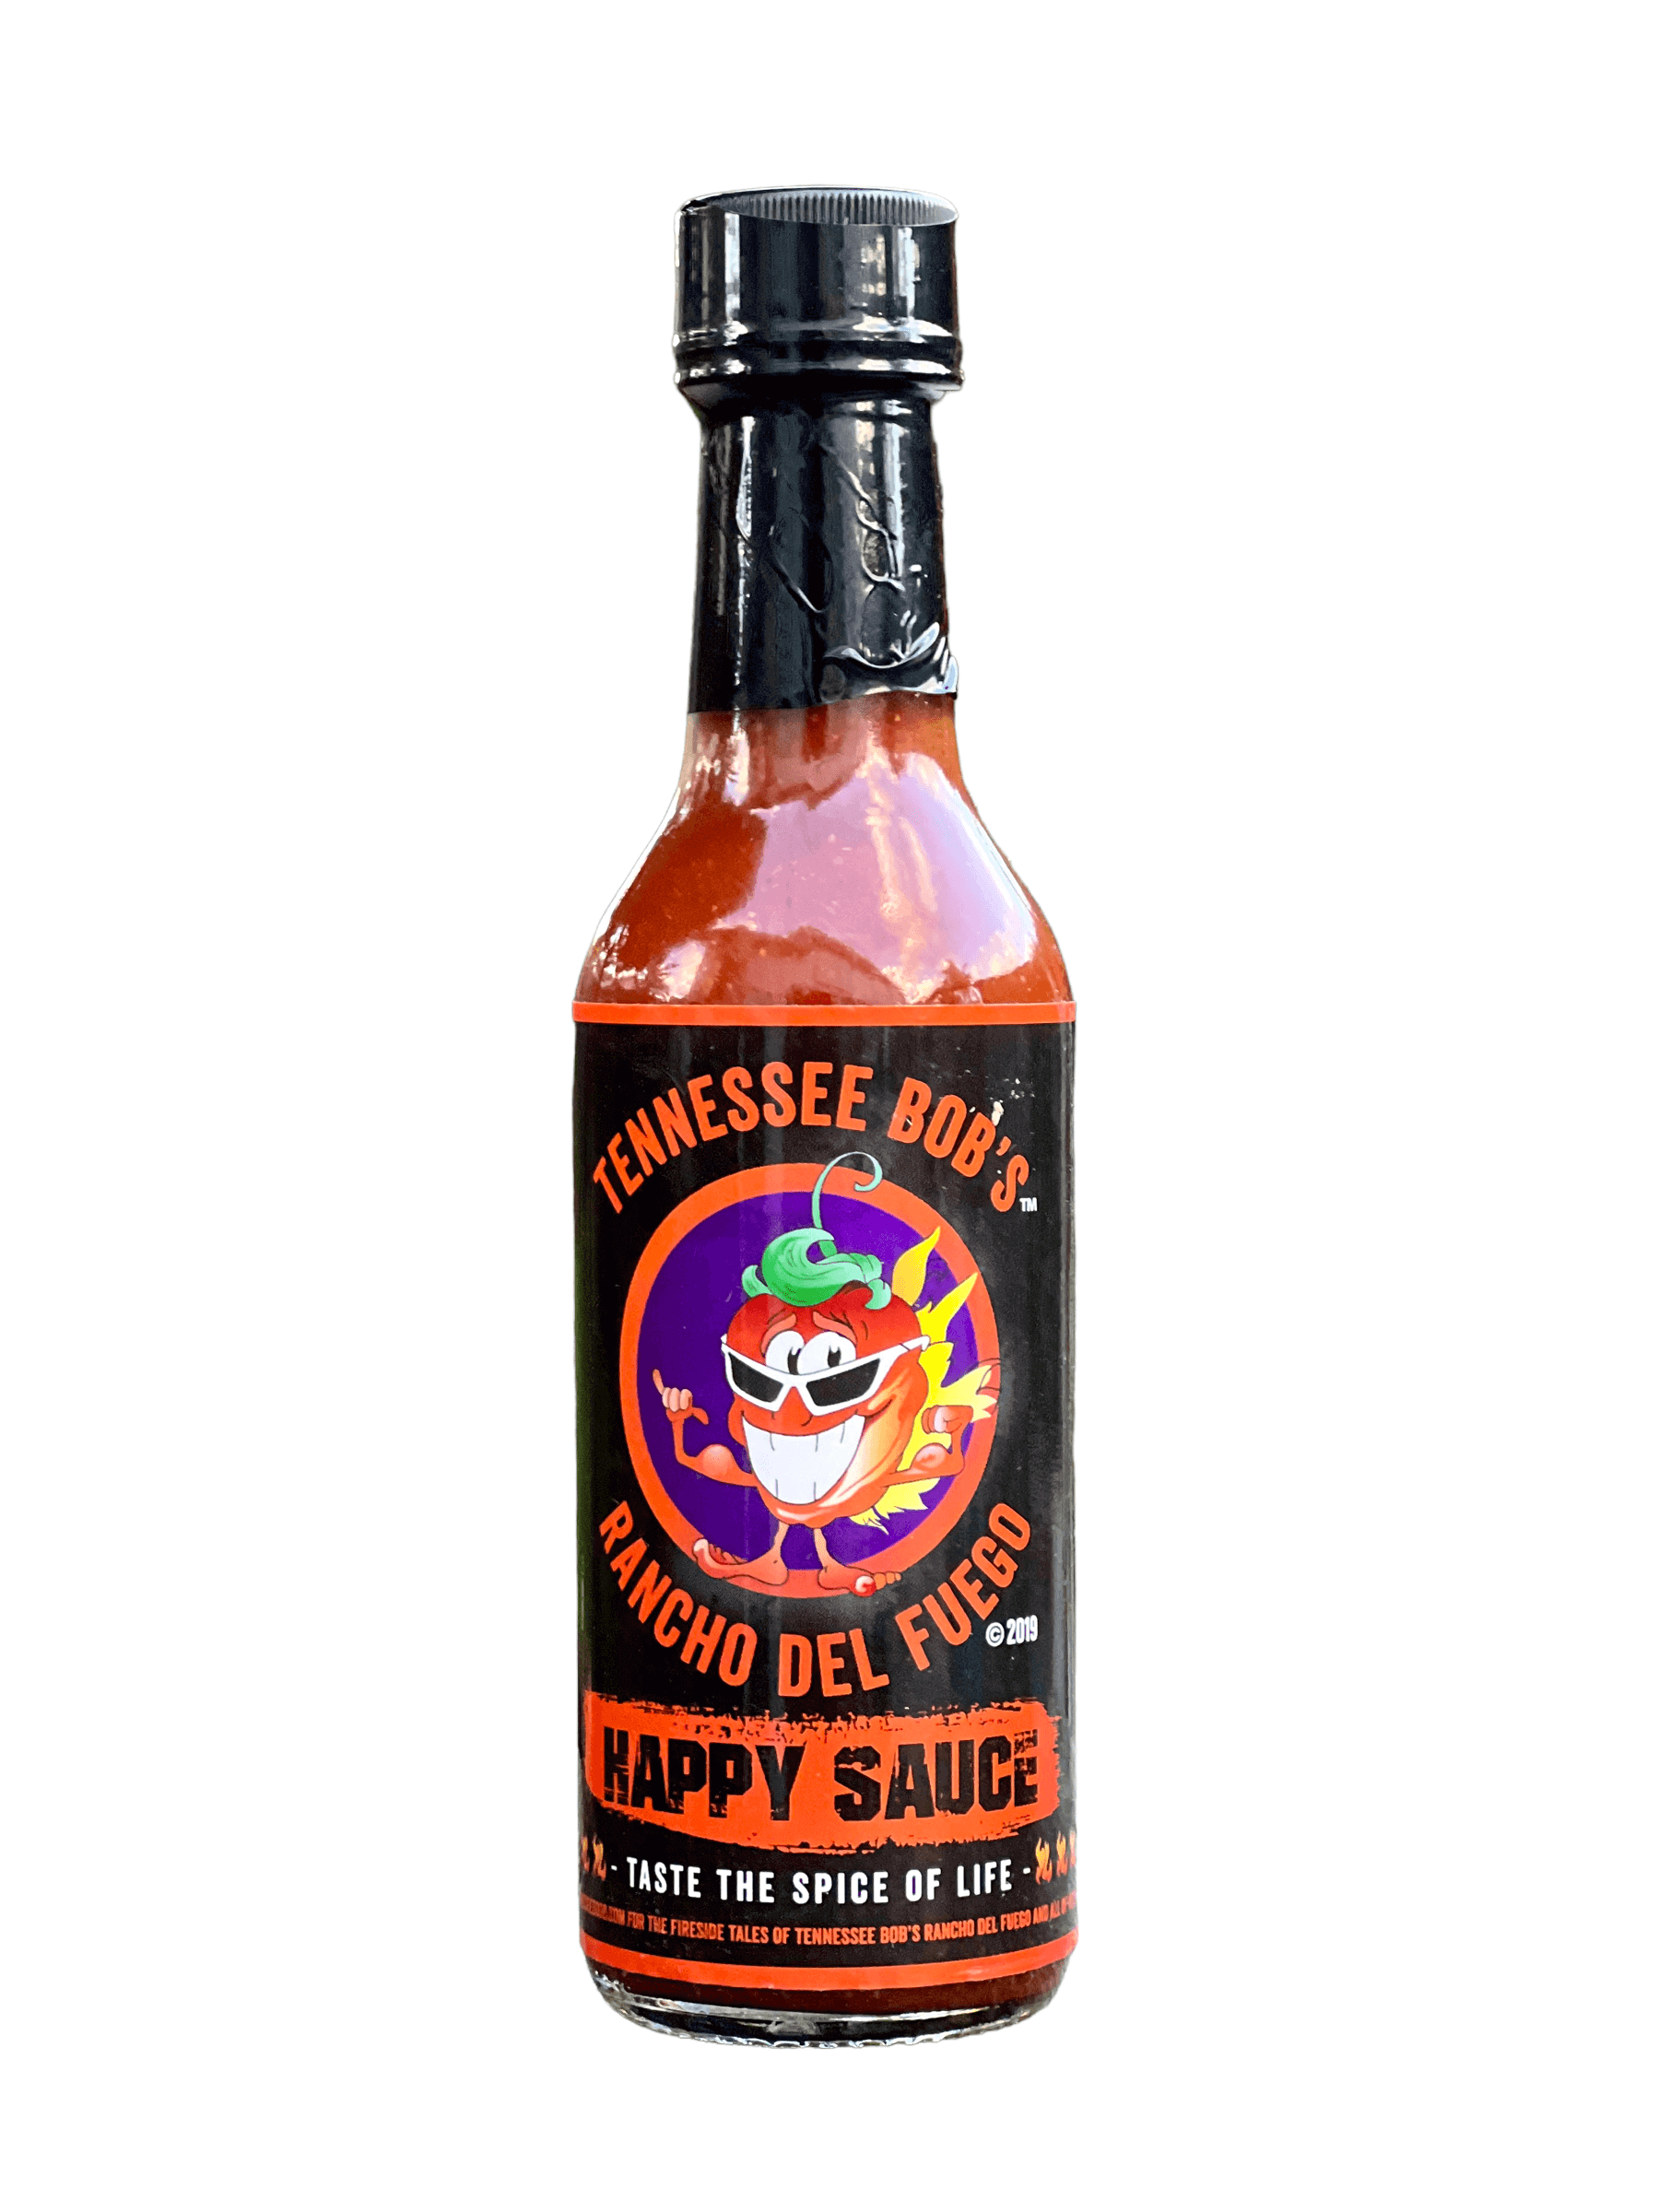 The Cuphead Show! Hot Sauce 5-Pack Series 2 – The Cuphead Show